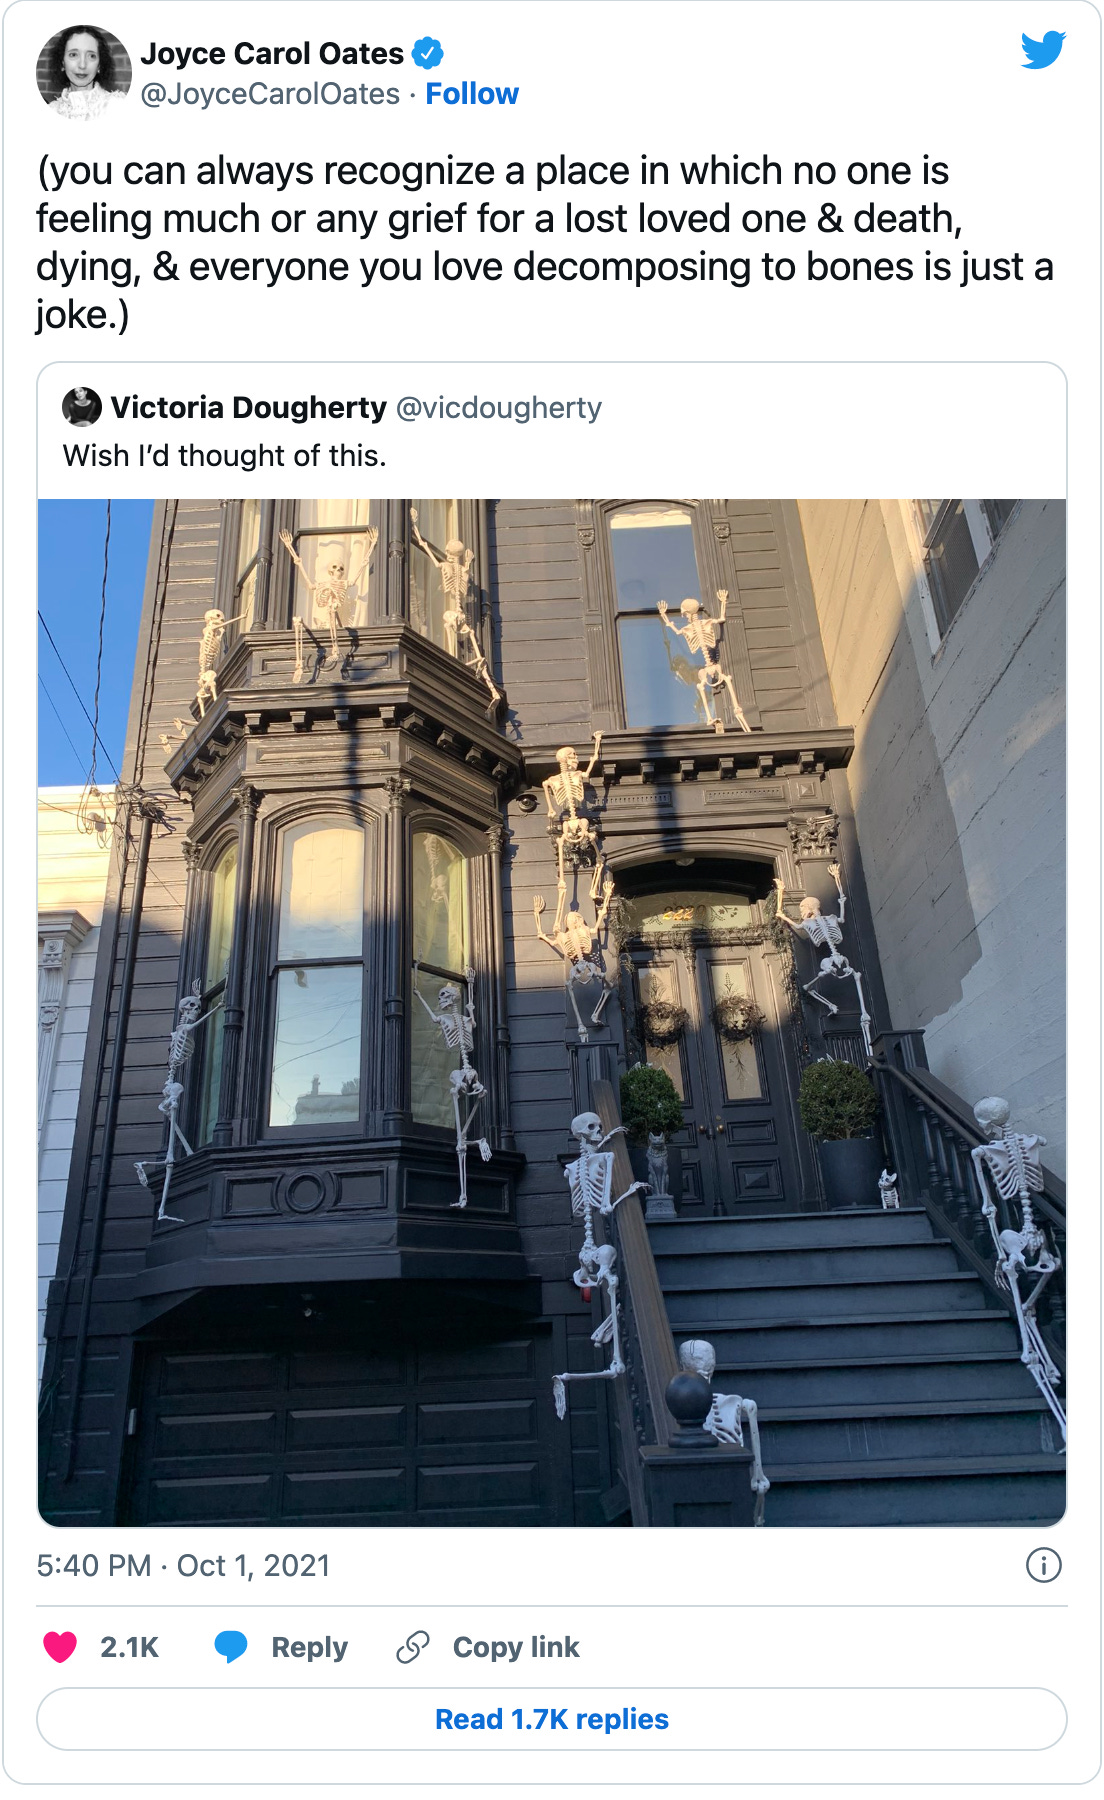 Classic JCO tweet from October 1, 2021 embedding a picture of a Victorian rowhouse with fake Halloween skeleton decorations attached to look like they’re climbing up it. Joyce’s commentary is: “(you can always recognize a place in which no one is feeling much or any grief for a lost loved one & death, dying, & everyone you love decomposing to bones is just a joke.)”